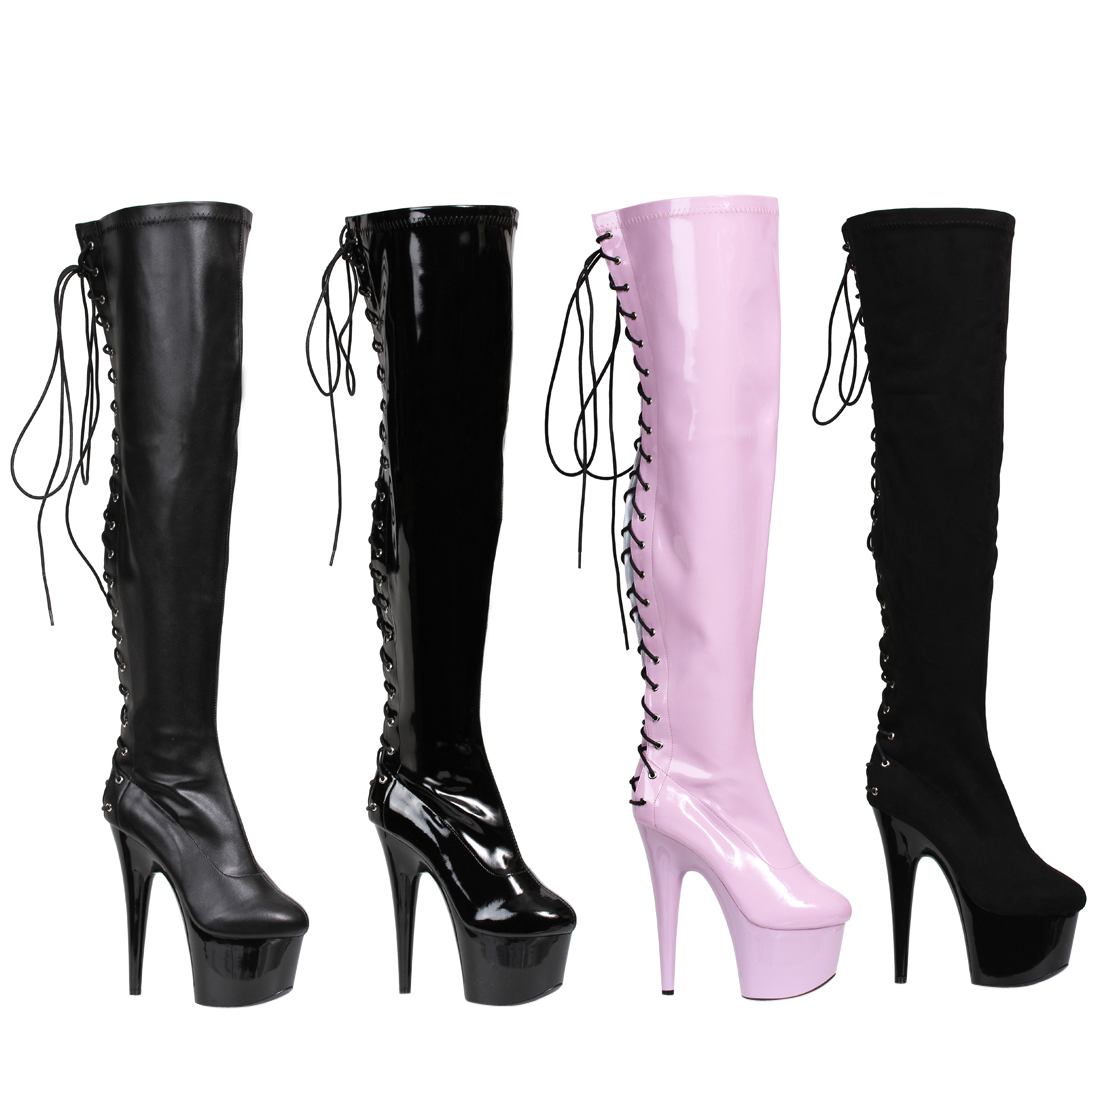 ELLIE 609-FARE Women's 6" Heel Lace Up Platform Thigh High Boot - image 1 of 2